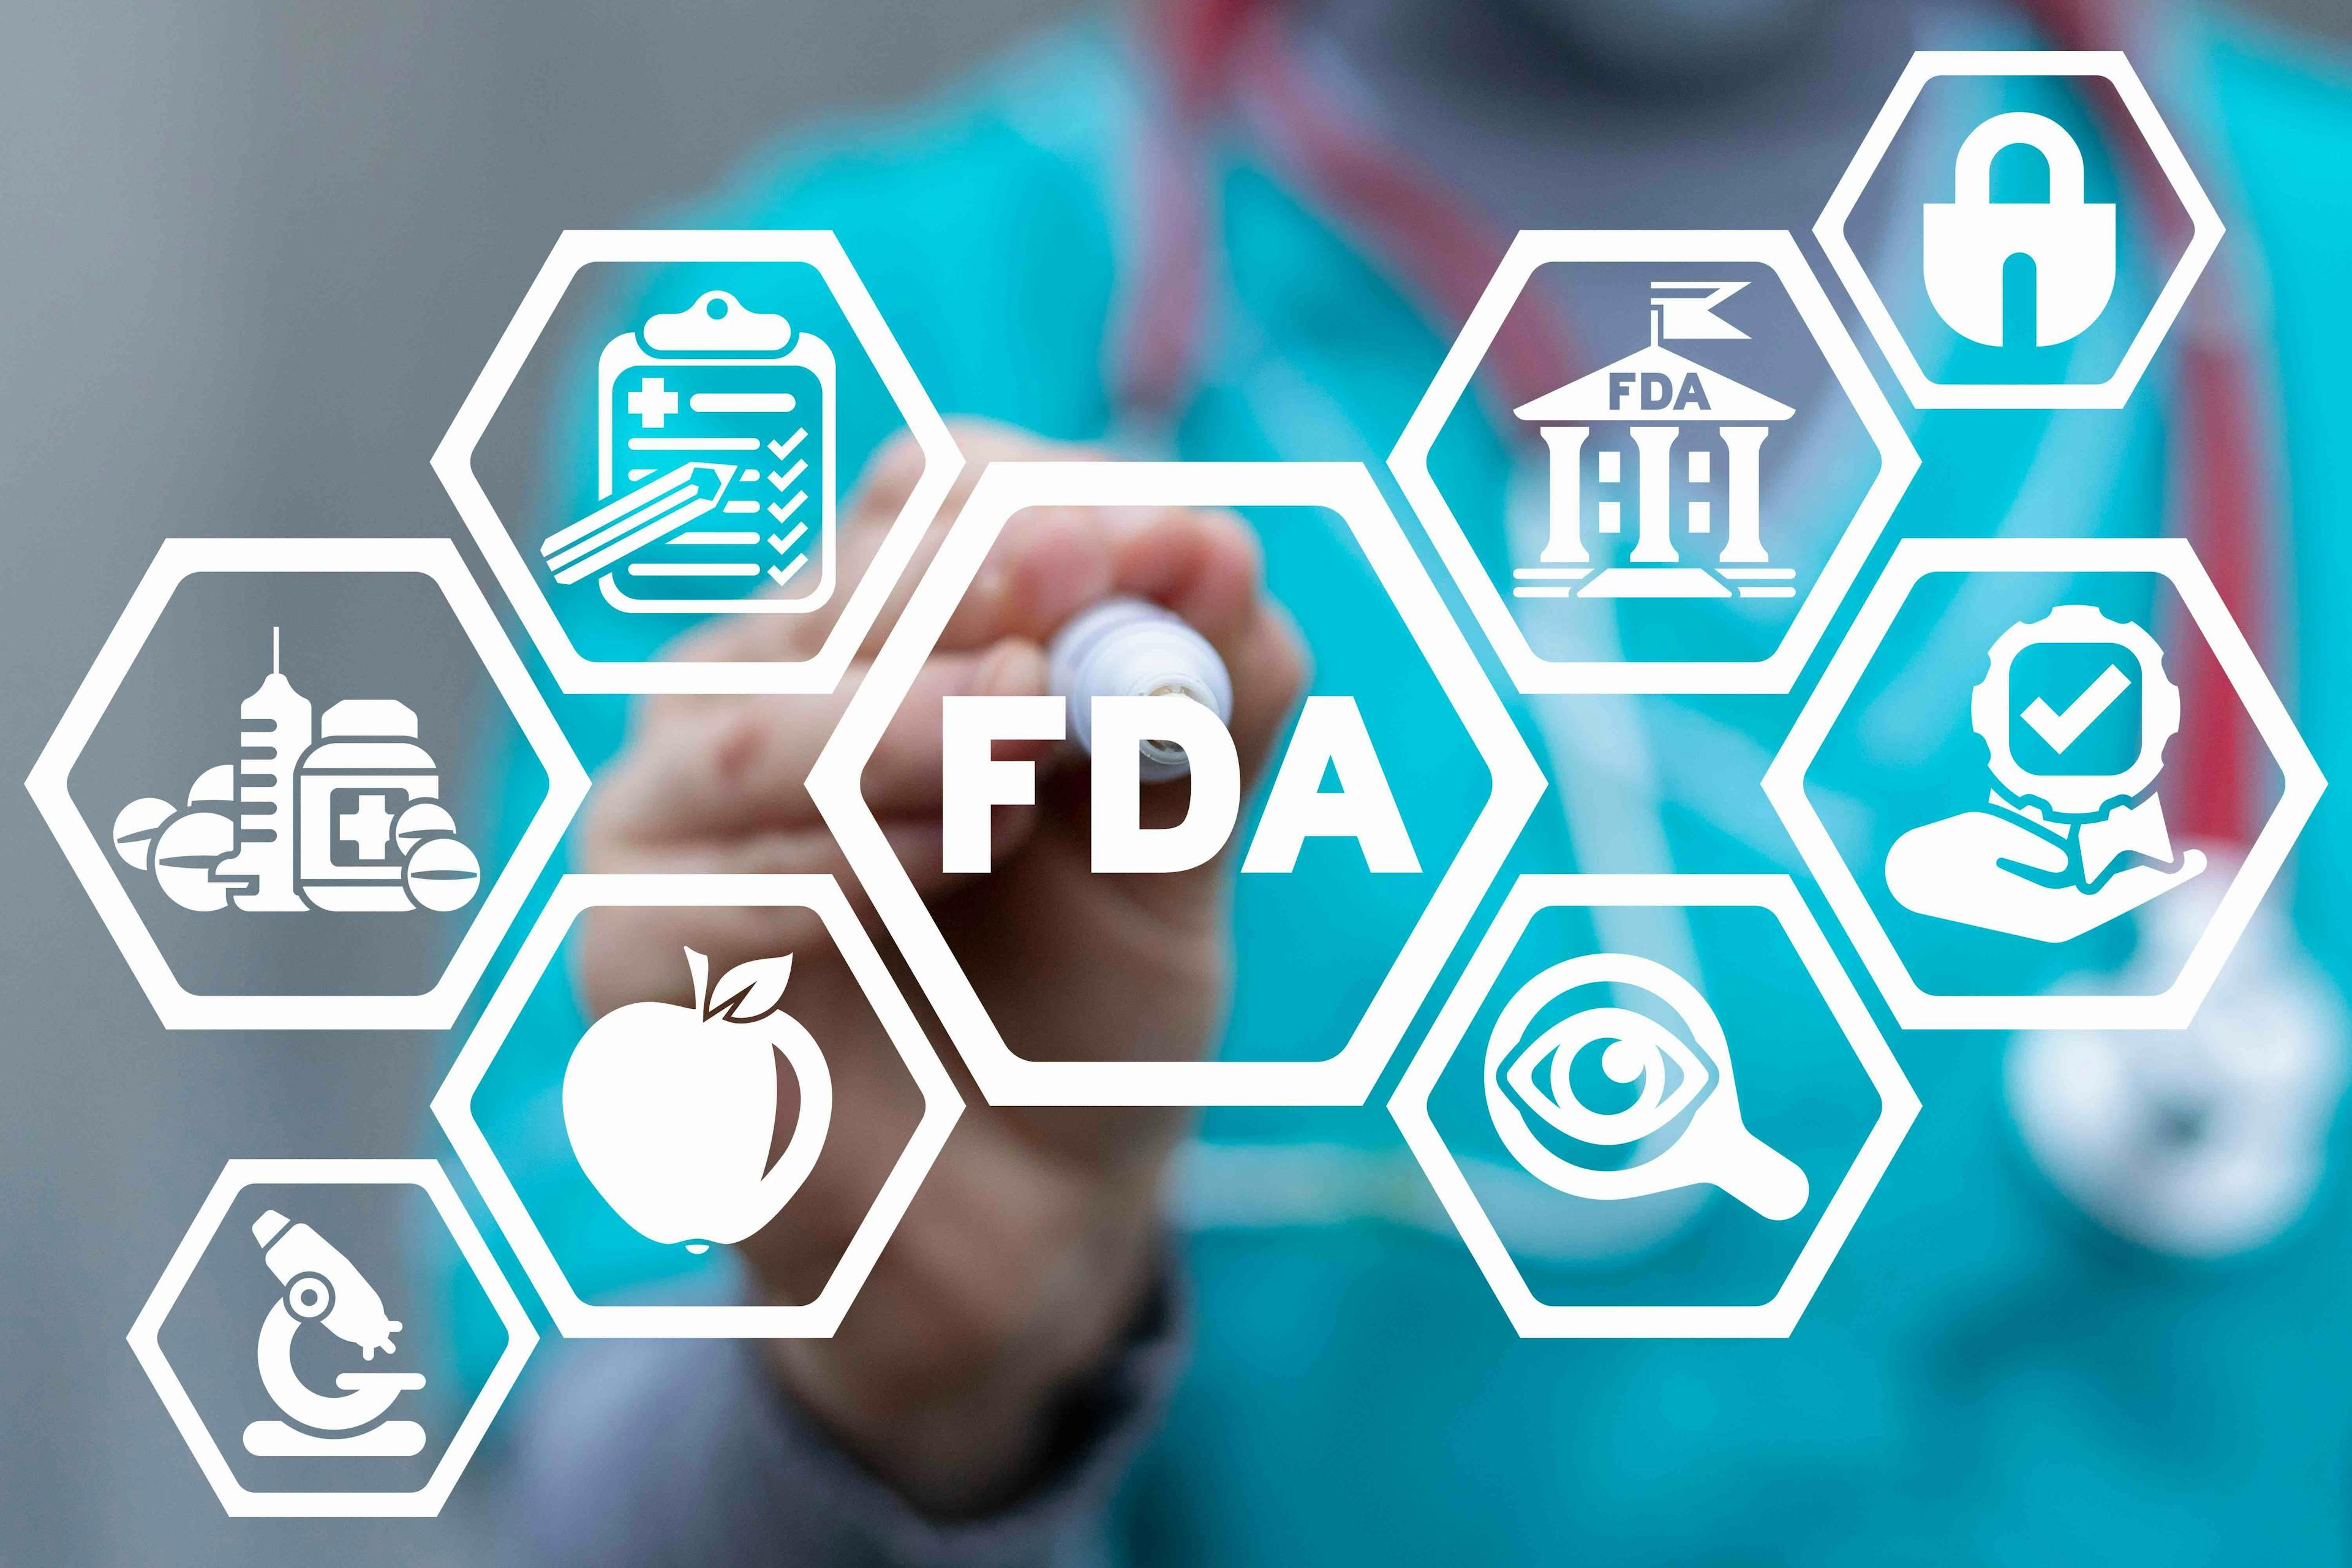 Doctor with health care icons and FDA | Image credit: wladimir1804 - stock.adobe.com